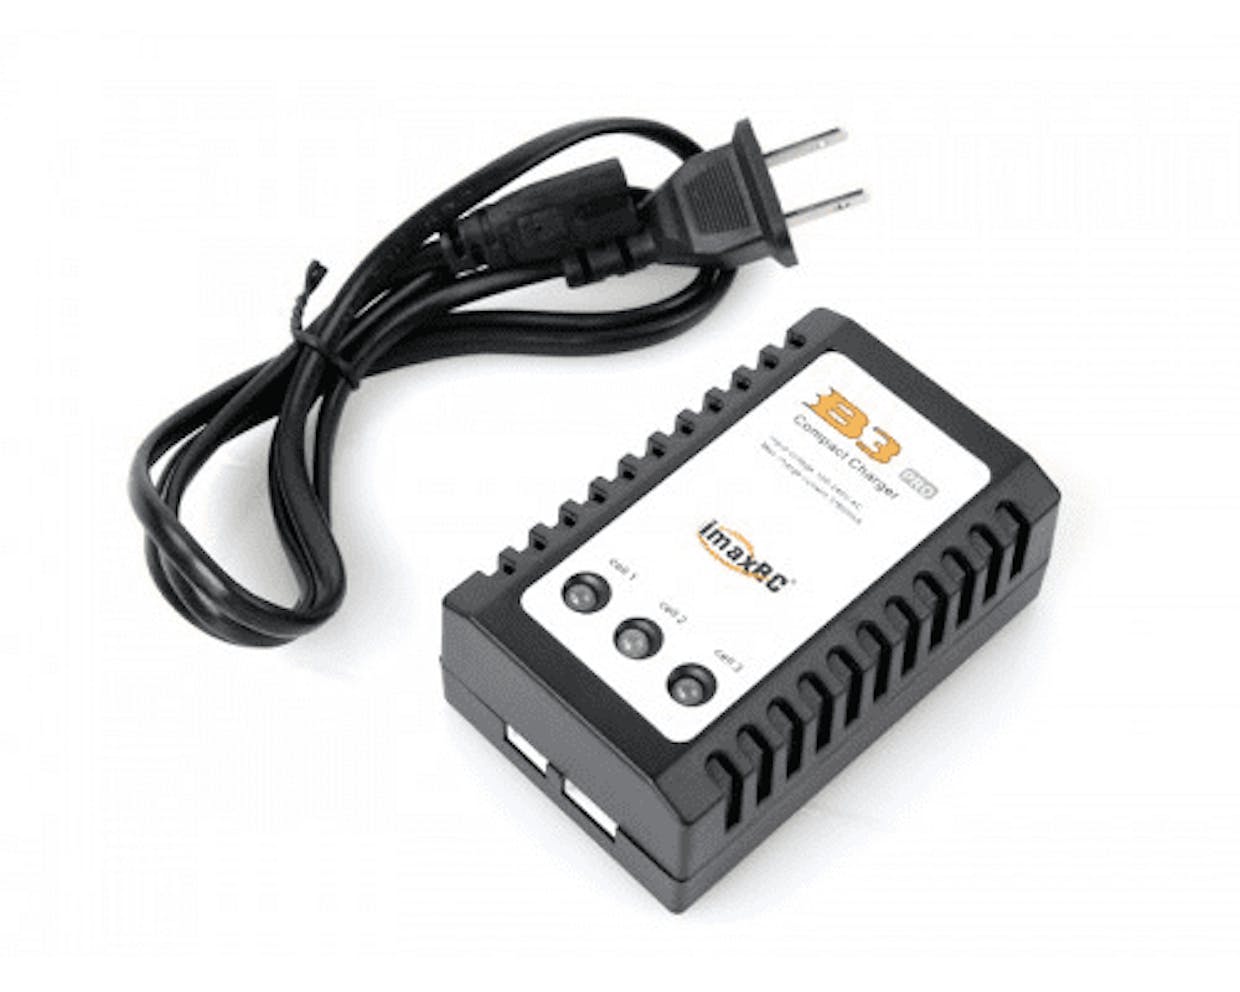 hello to all, I'm new I'm going to start my first Otto.

On the following article: https://www.ottodiy.com/blog/power there are different ways to power Otto, but in the kits sold they are all powered by a 9V rechargeable battery at the cost I wonder what it is must choose for a basic Otto.

Do you have a suggestion for me?

thank you